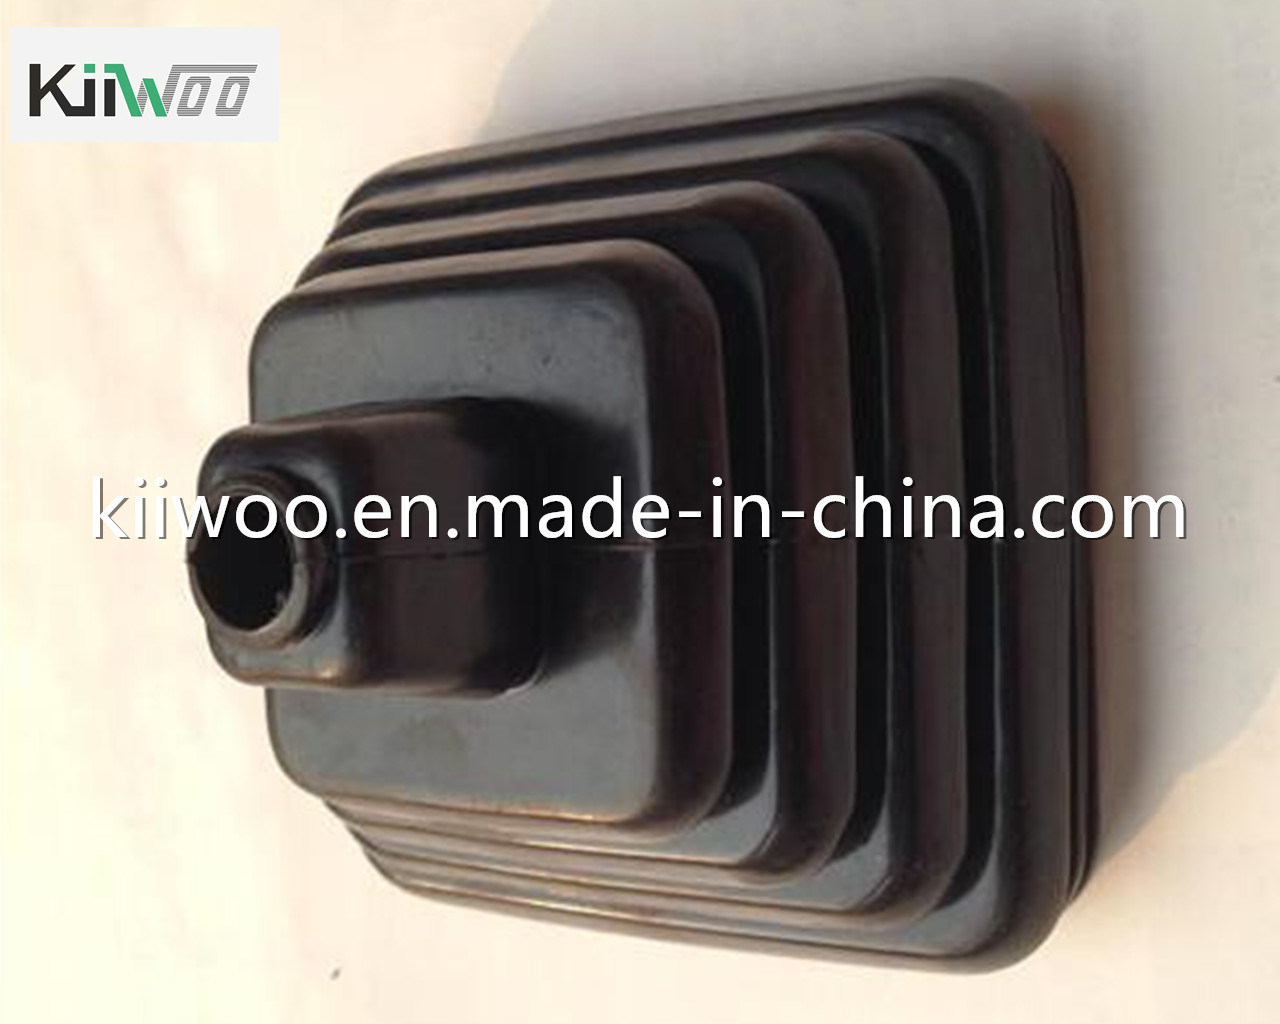 Dust Proof Cover for Auto Parts or Electronic Parts